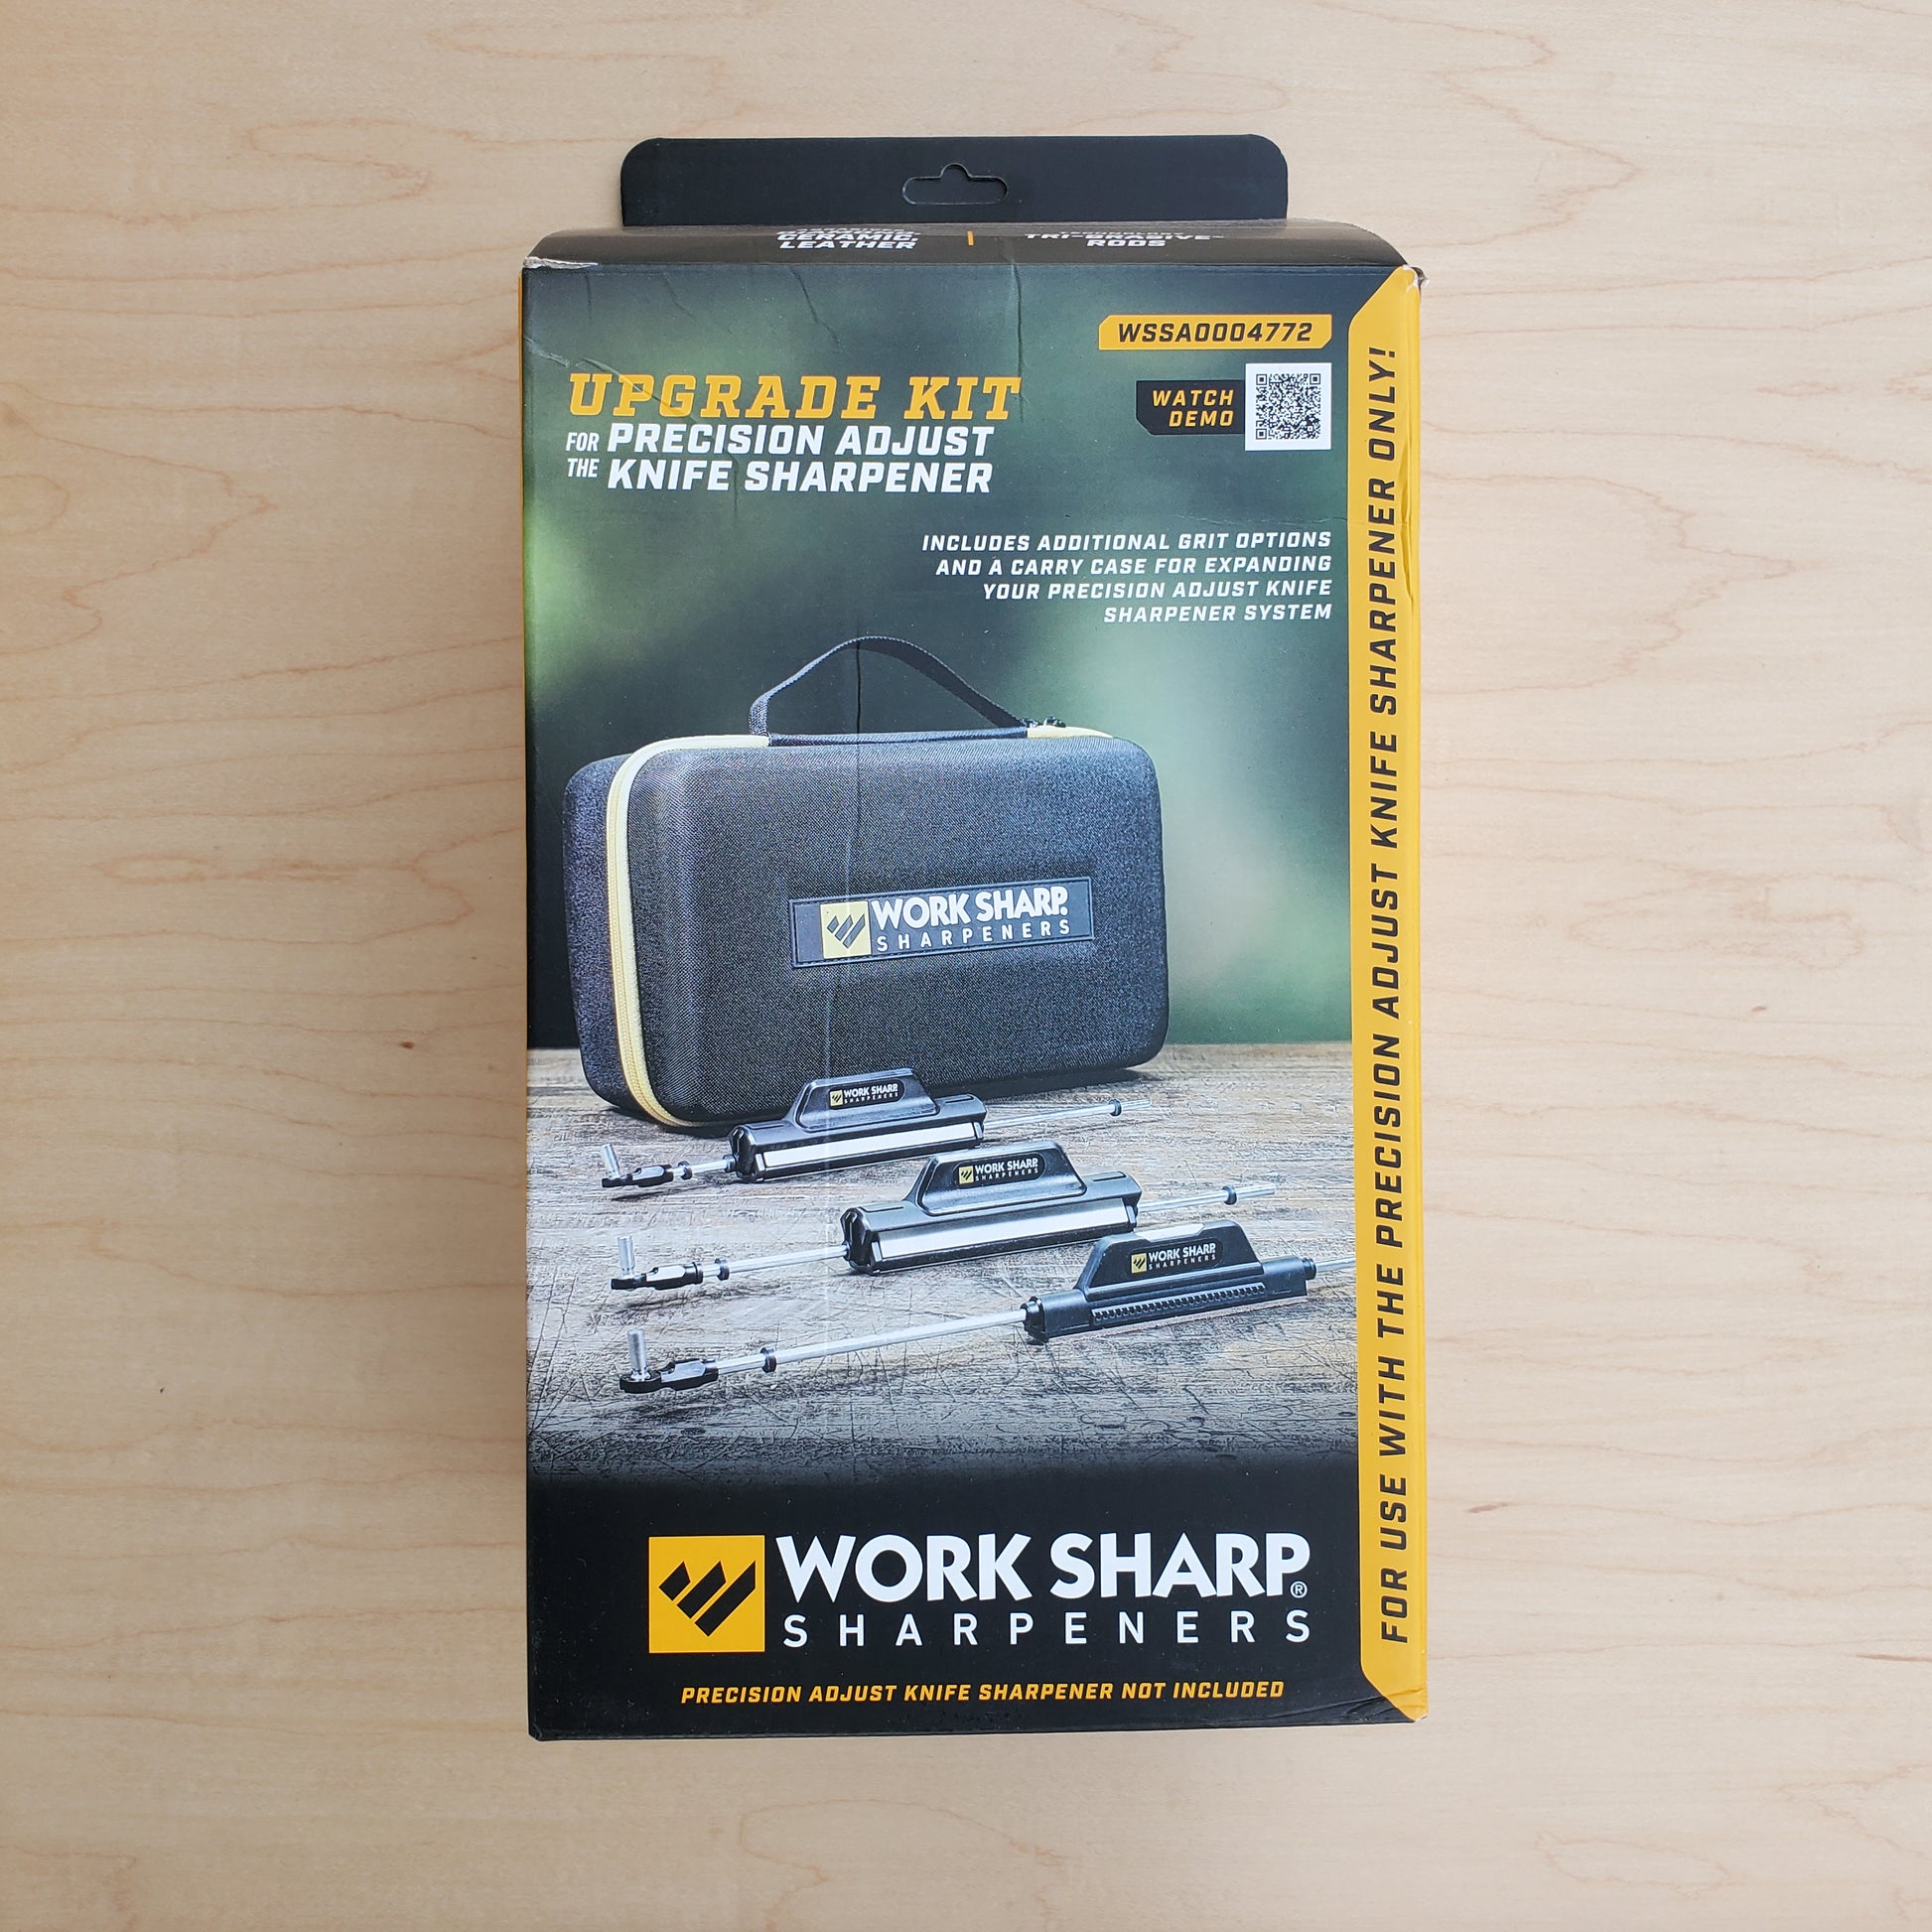  Upgrade Kit for Work Sharp Guided Sharpening System WSSA0003300  : Tools & Home Improvement